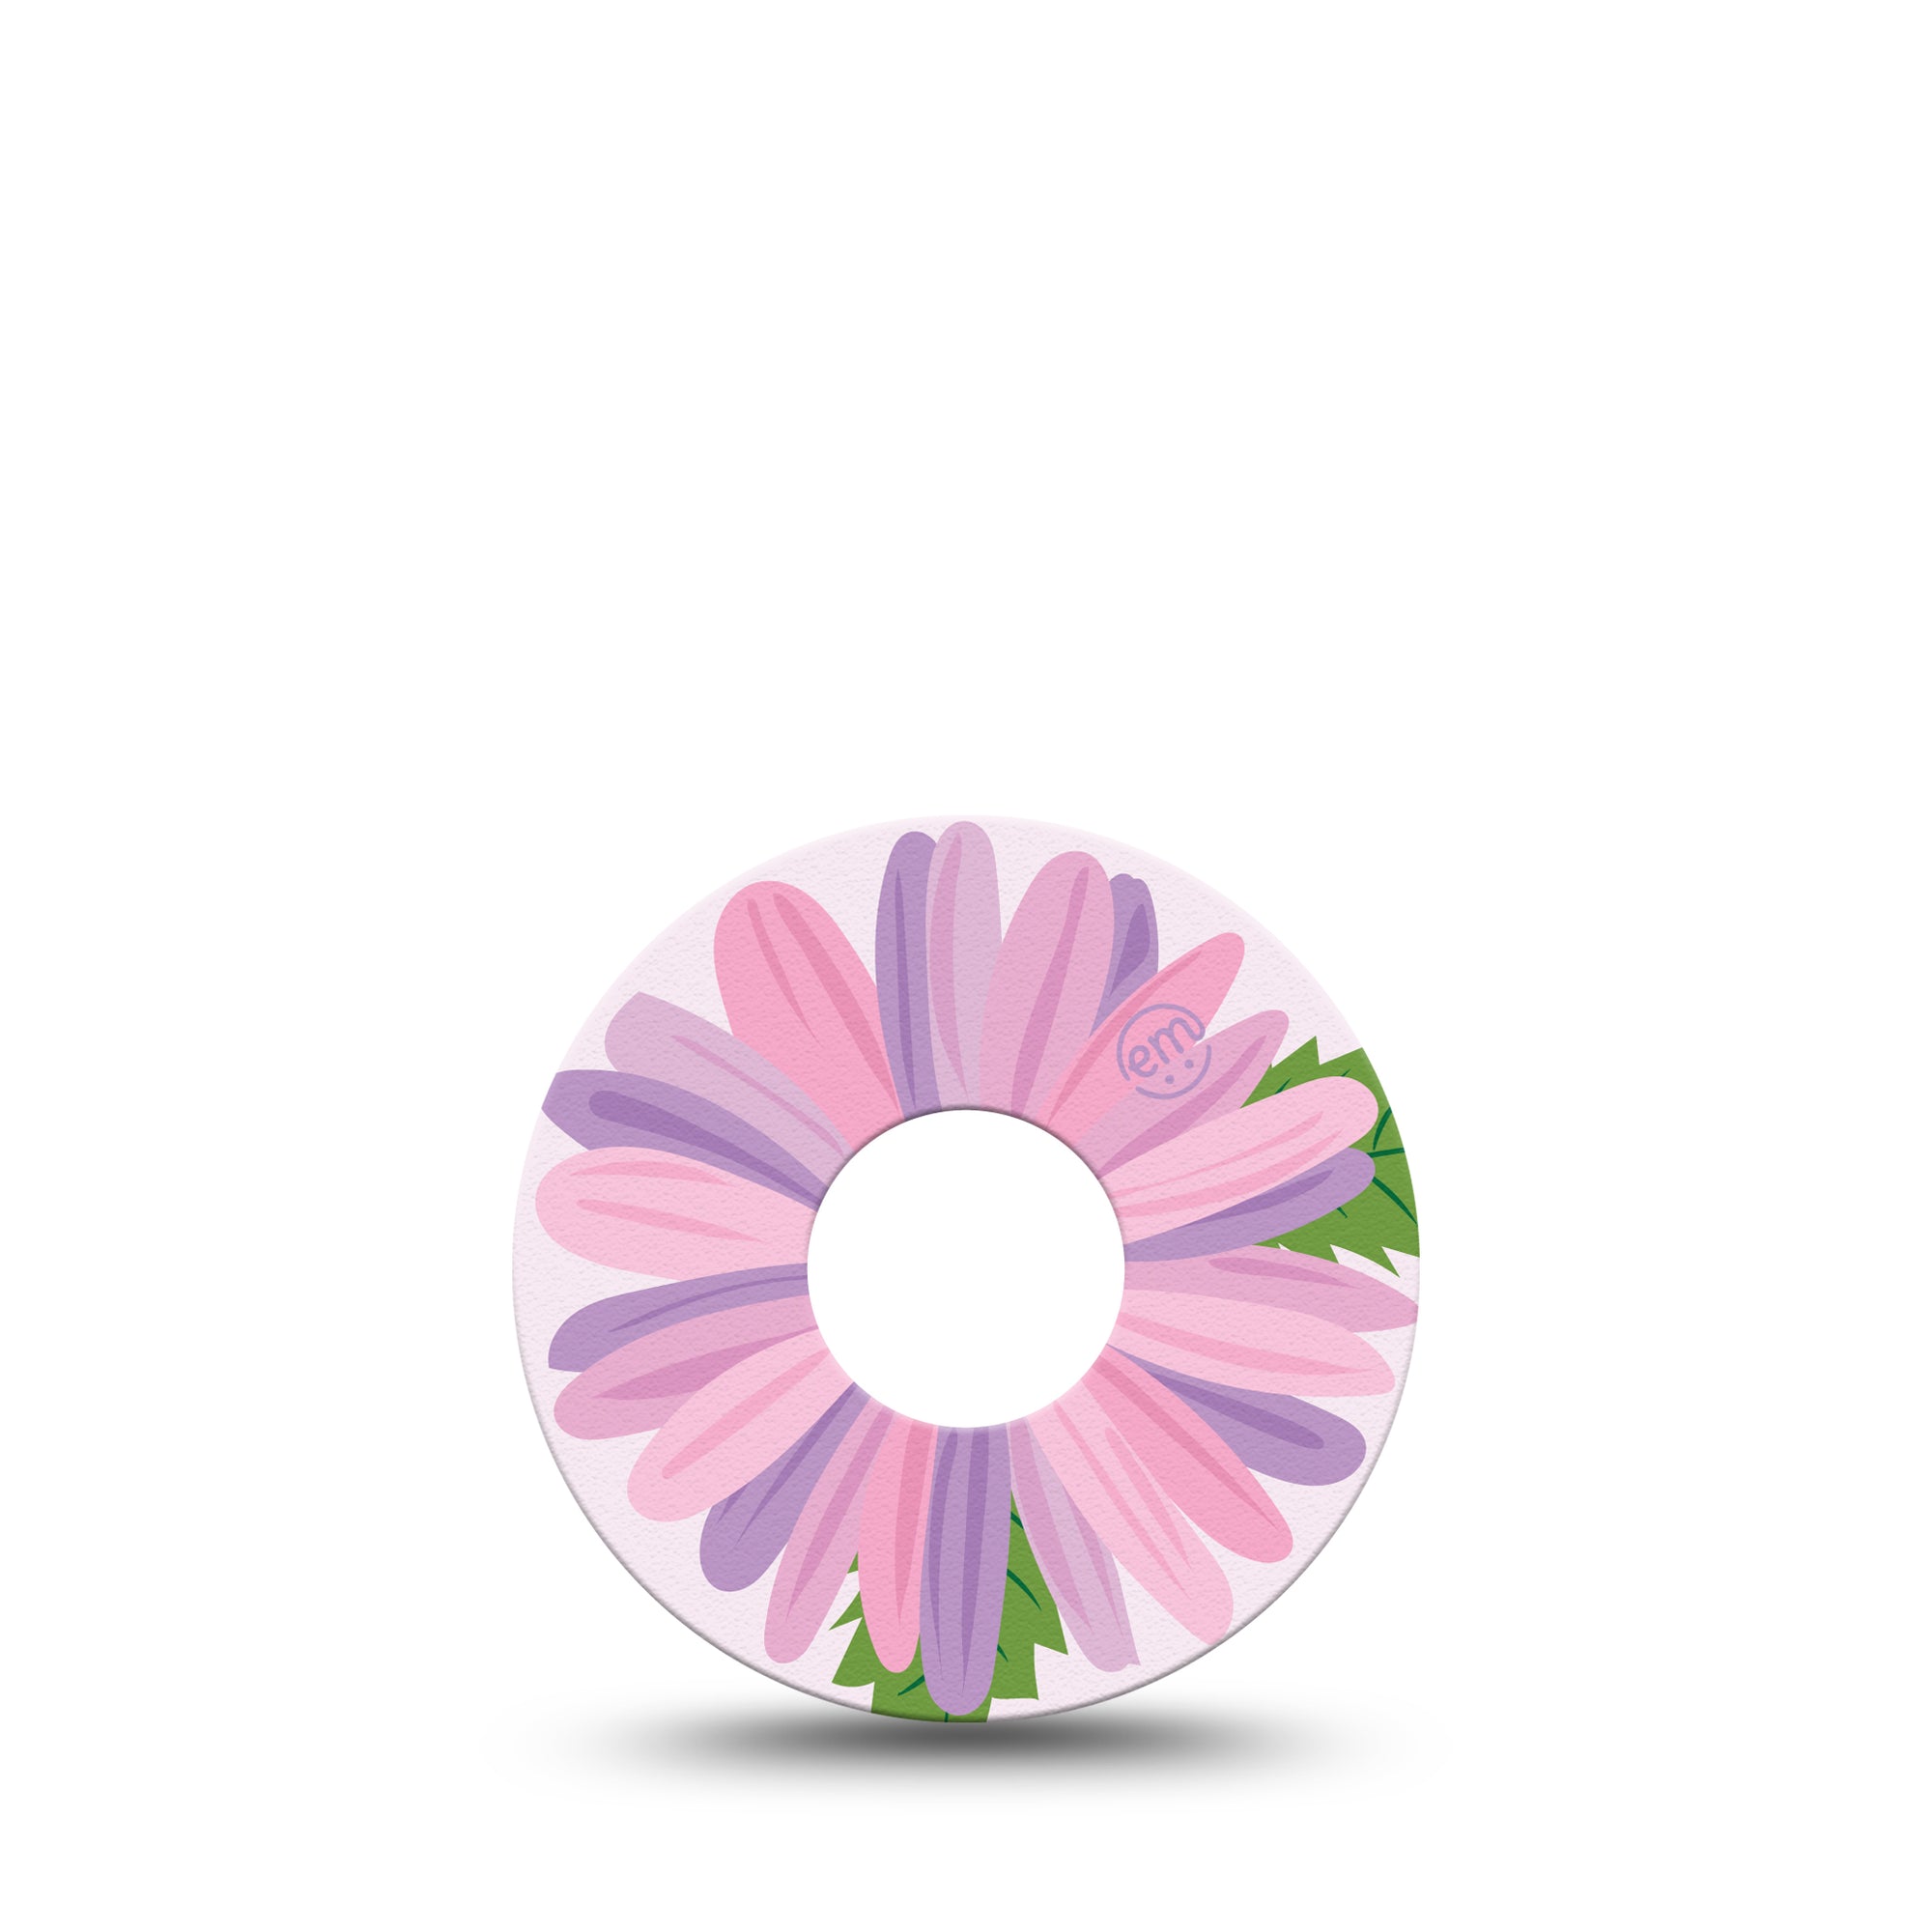 Daisy Libre 3 Tape, Single, Pastel Floral Themed, CGM Adhesive Patch Design